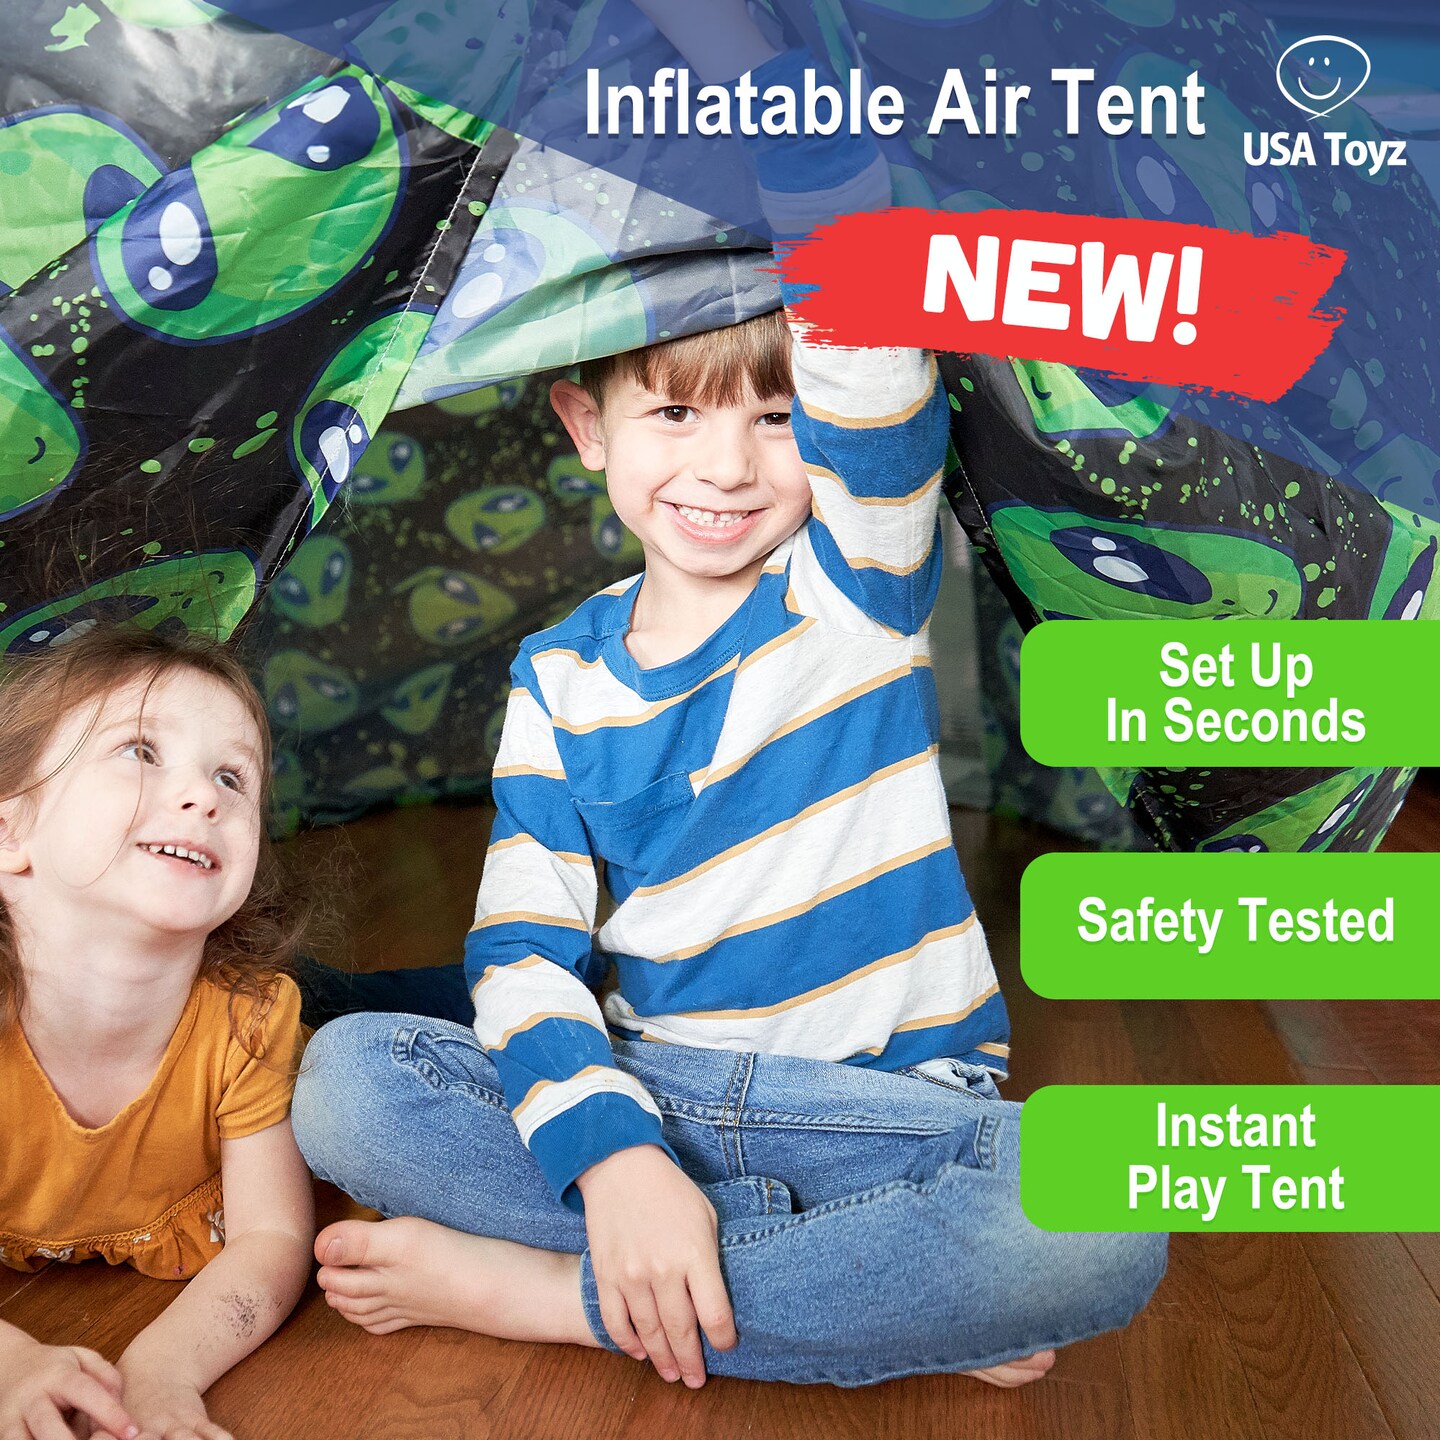 USA Toyz Air Dome Alien Pop Up Tent for Kids